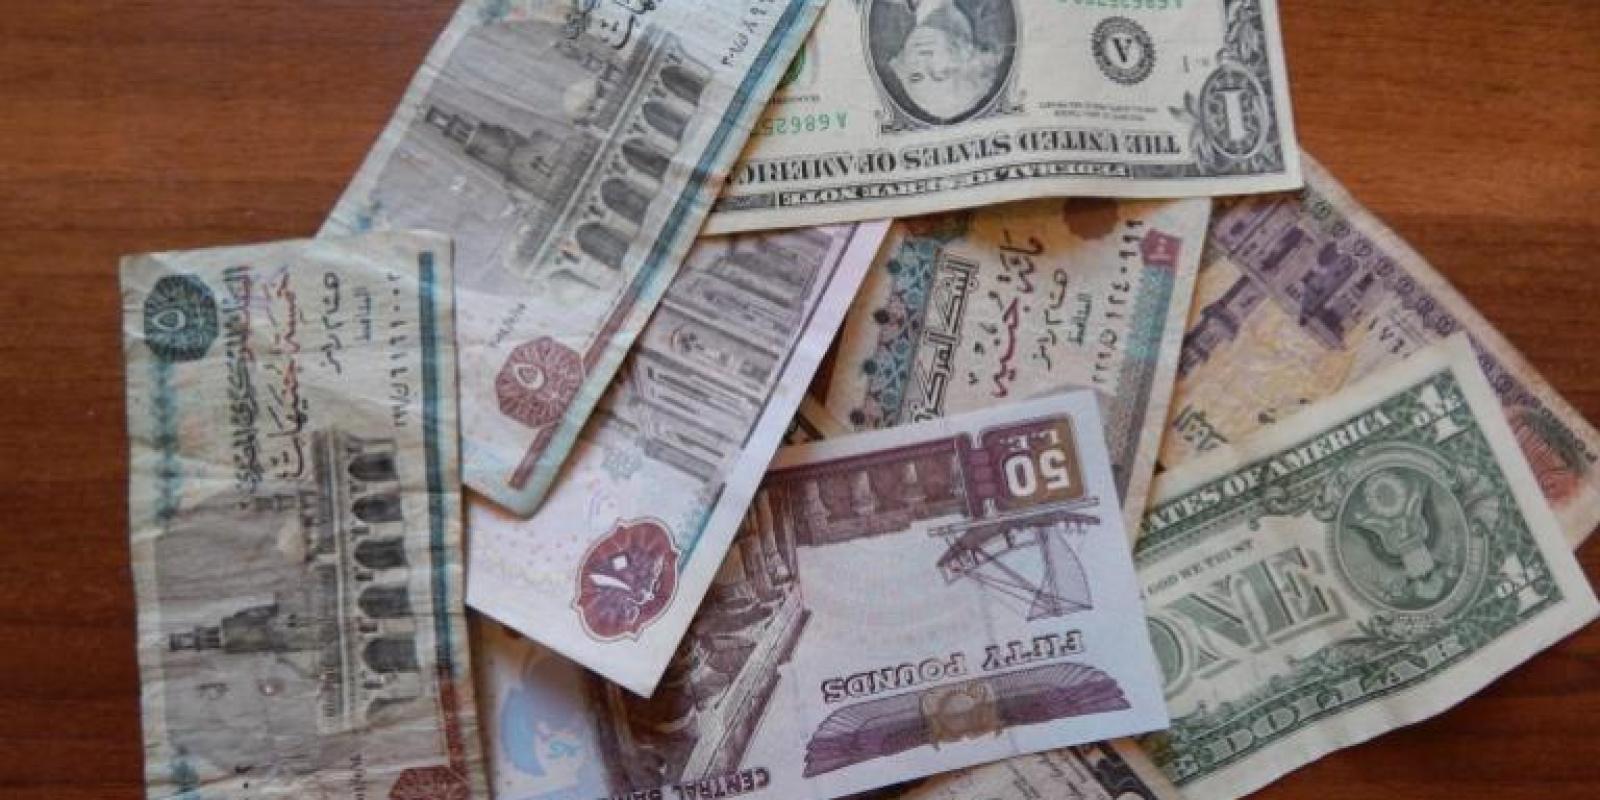 Egypt is struggling as the Egyptian pound fell to its lowest rate against the US dollar in the black market